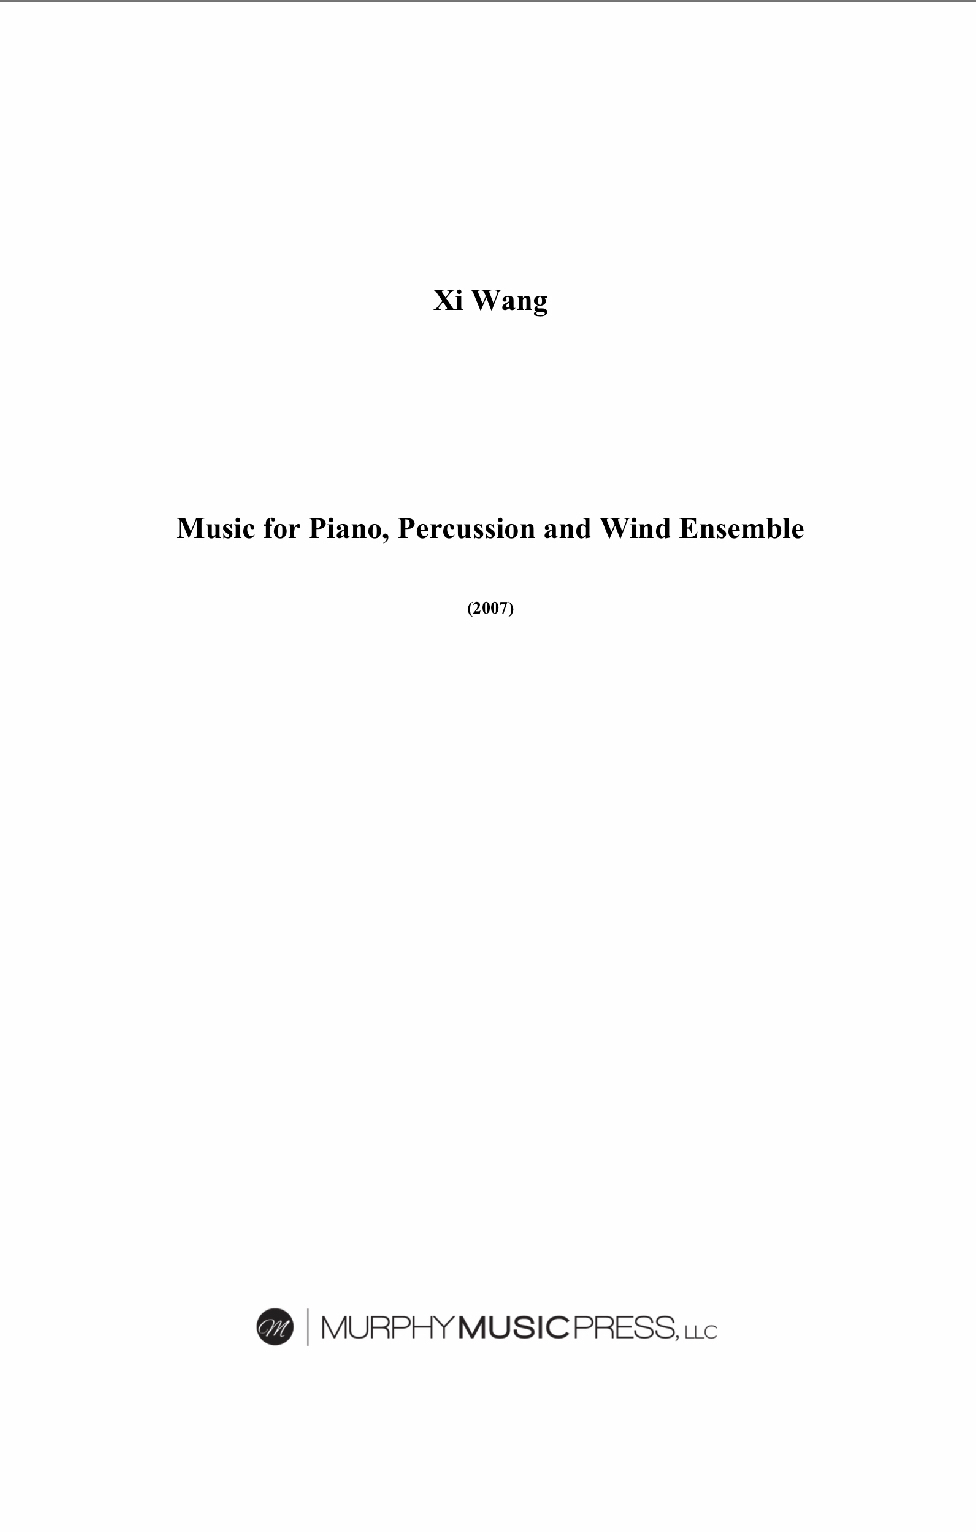 Music For Piano, Percussion, And Wind Ensemble (Rental) by Xi Wang